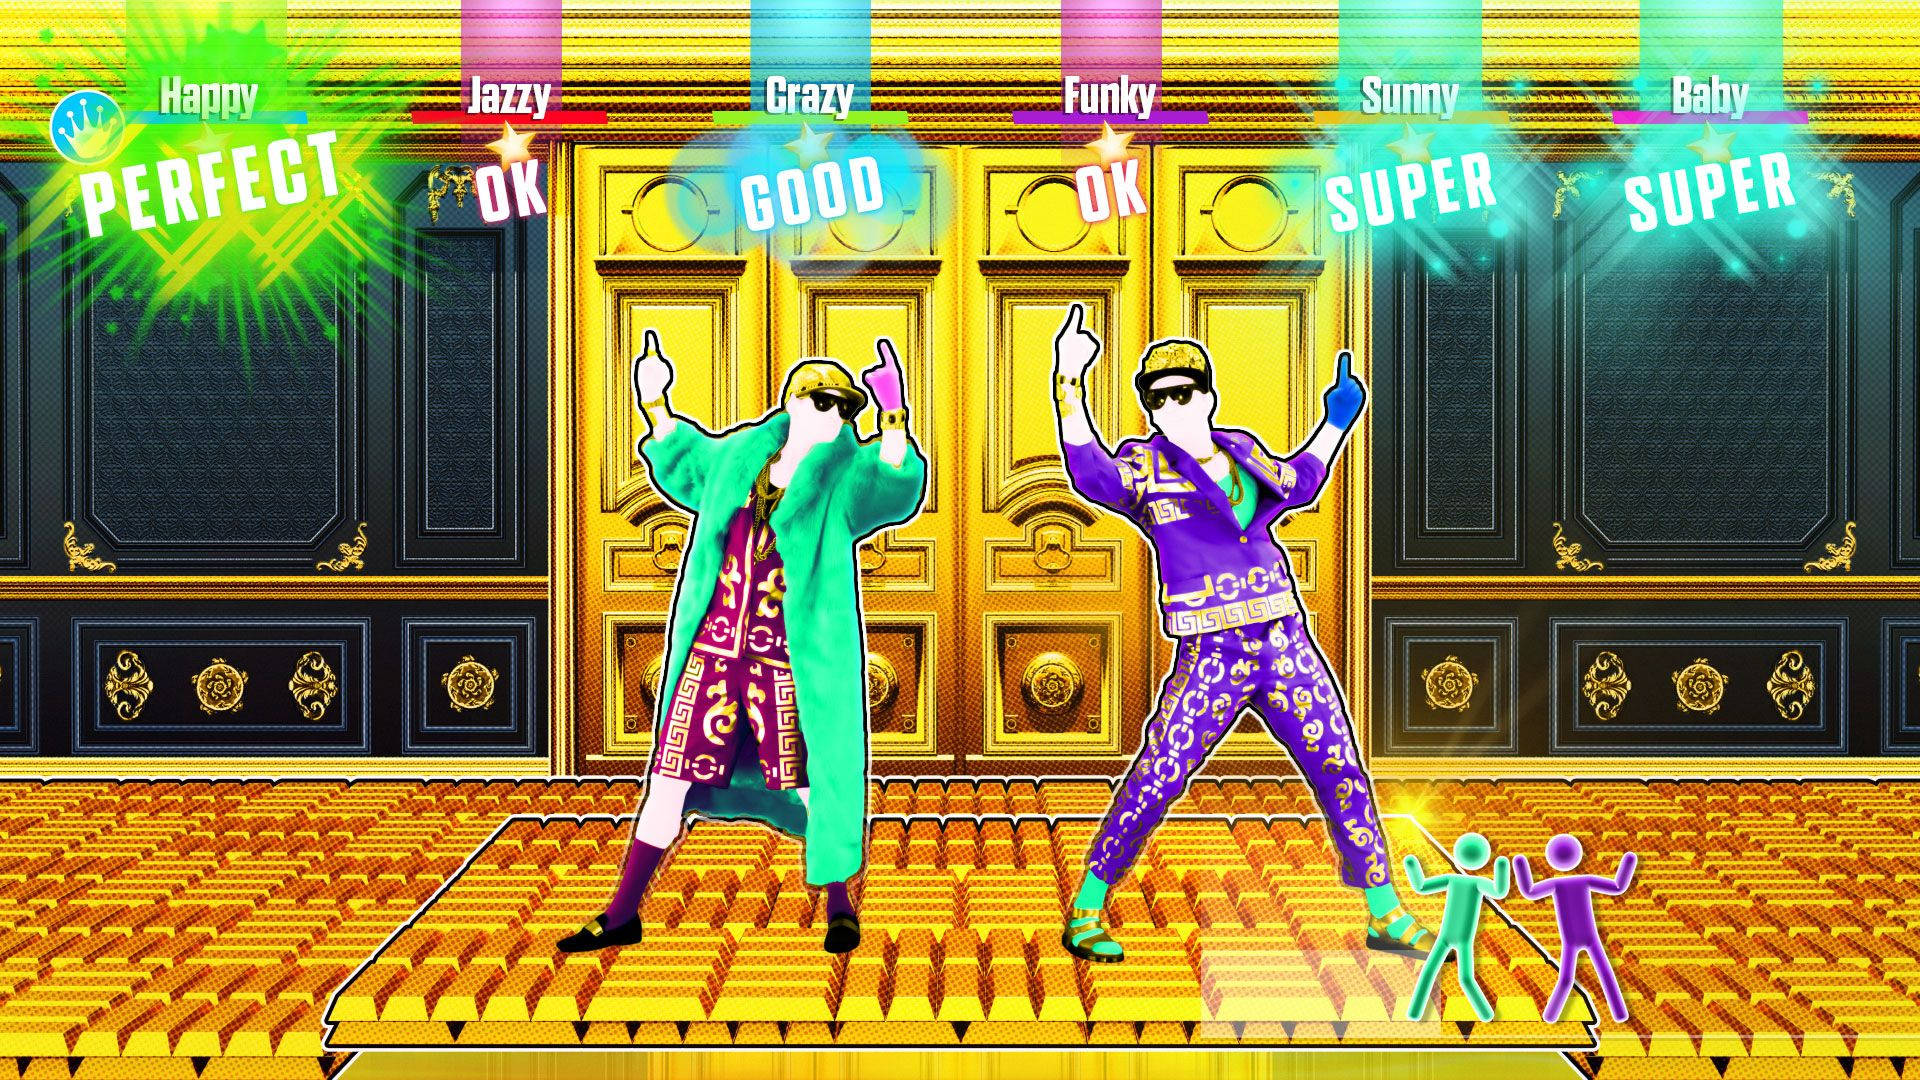 Just Dance Dancers In Gold Room Background